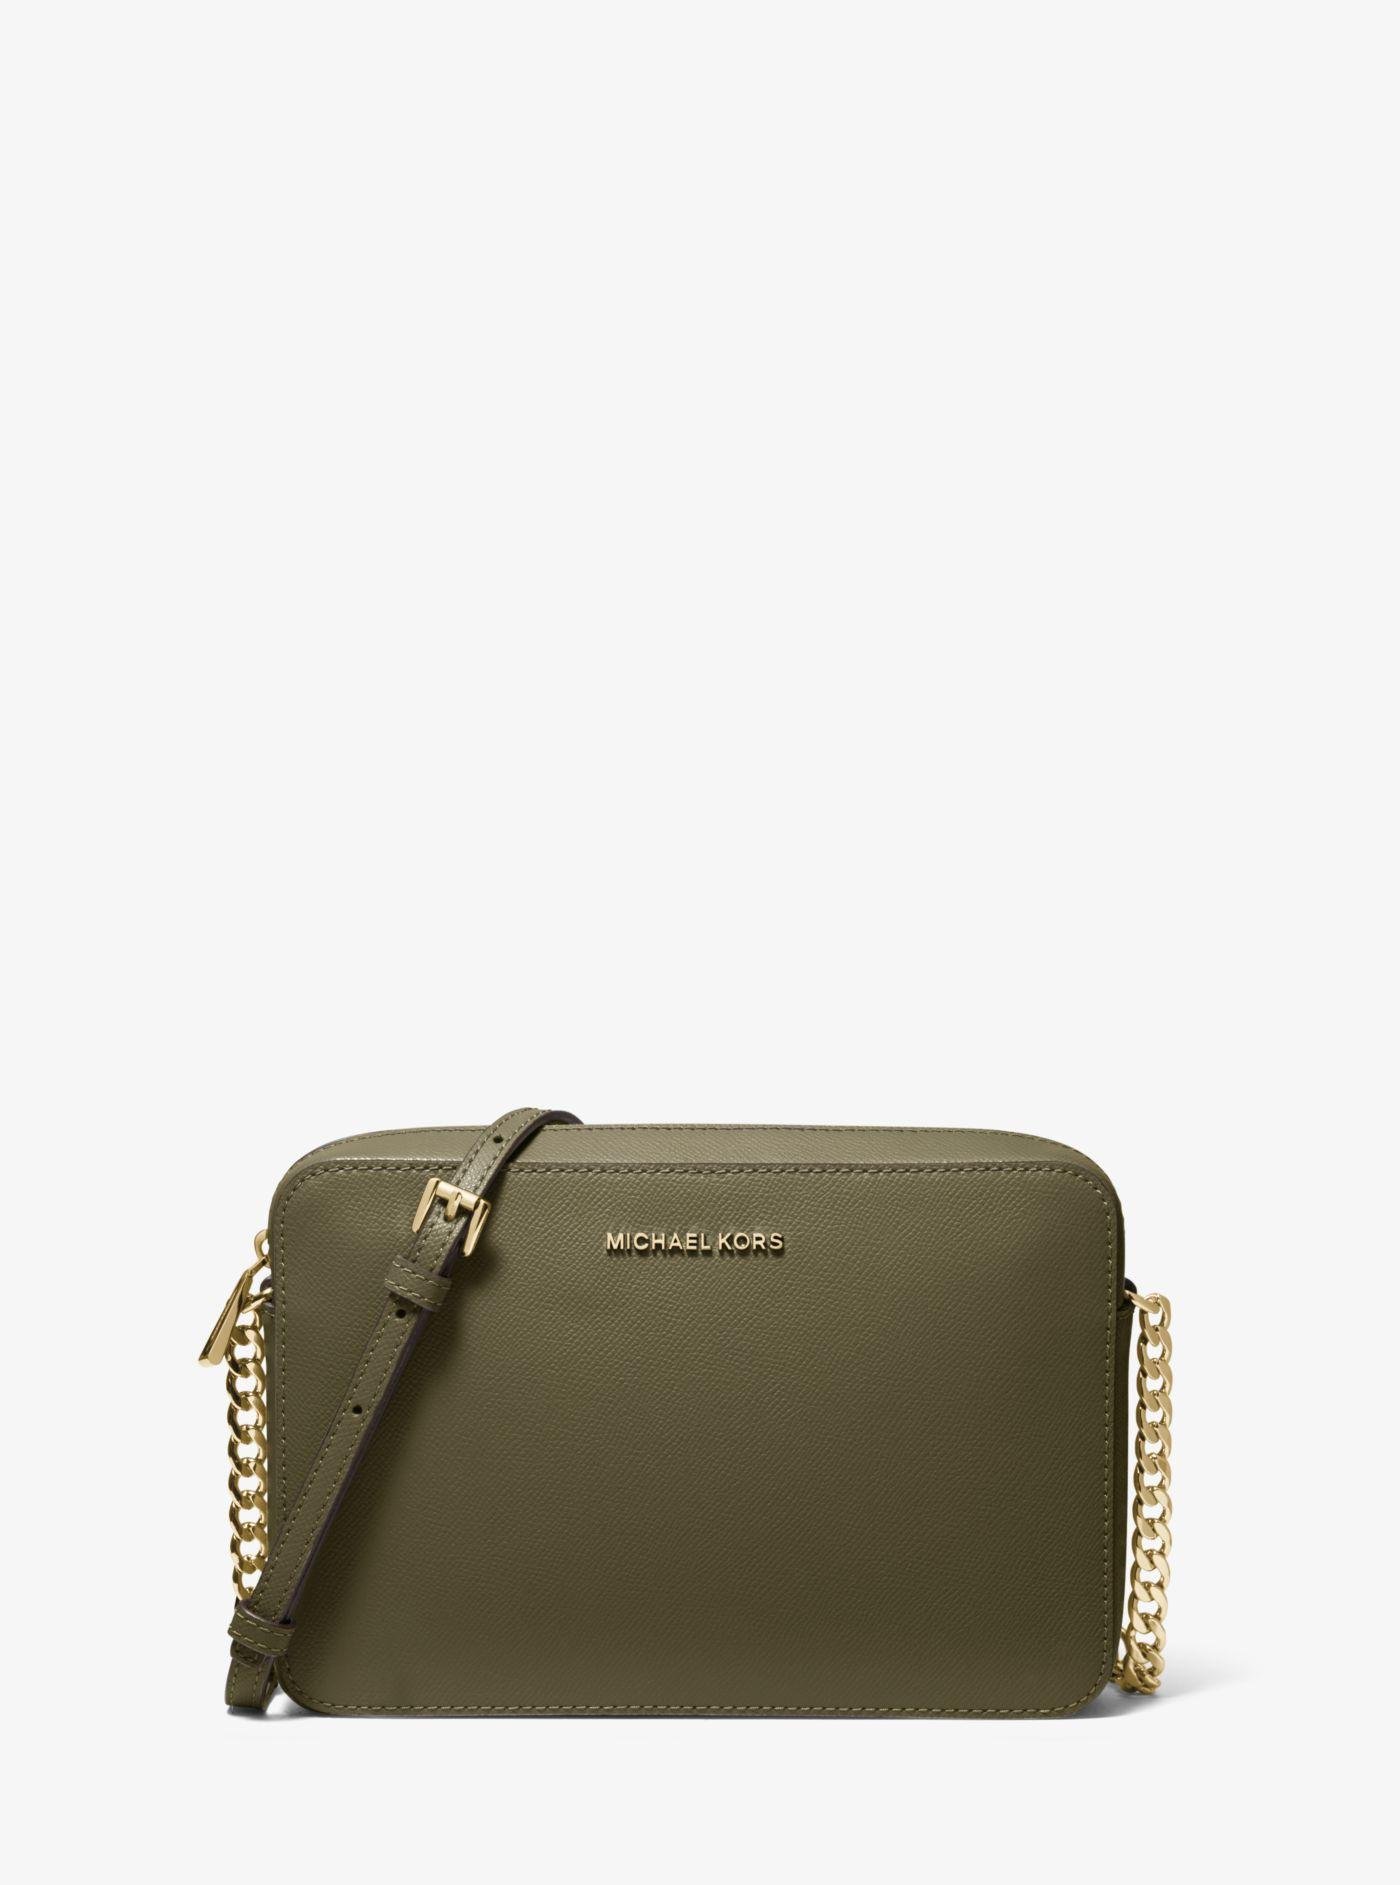 Michael Kors Jet Set Large Saffiano Leather Crossbody Bag in Olive (Green)  | Lyst